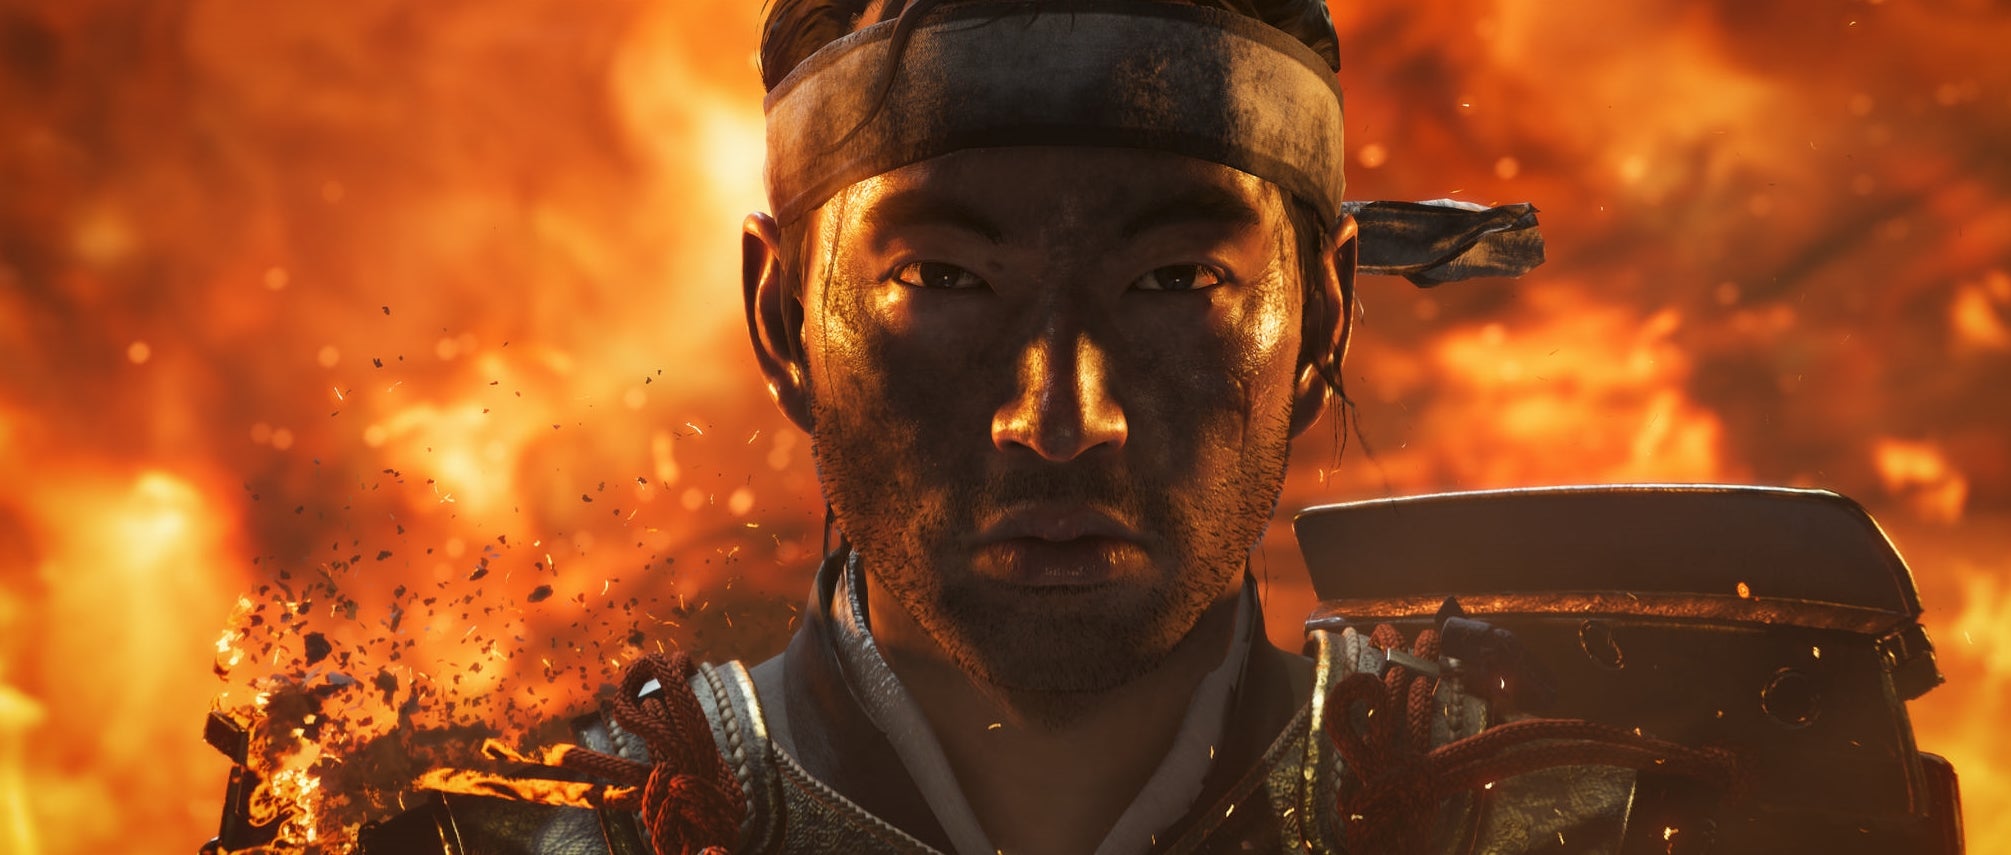 Image for Watch new Ghost of Tsushima teaser, full trailer coming at The Game Awards